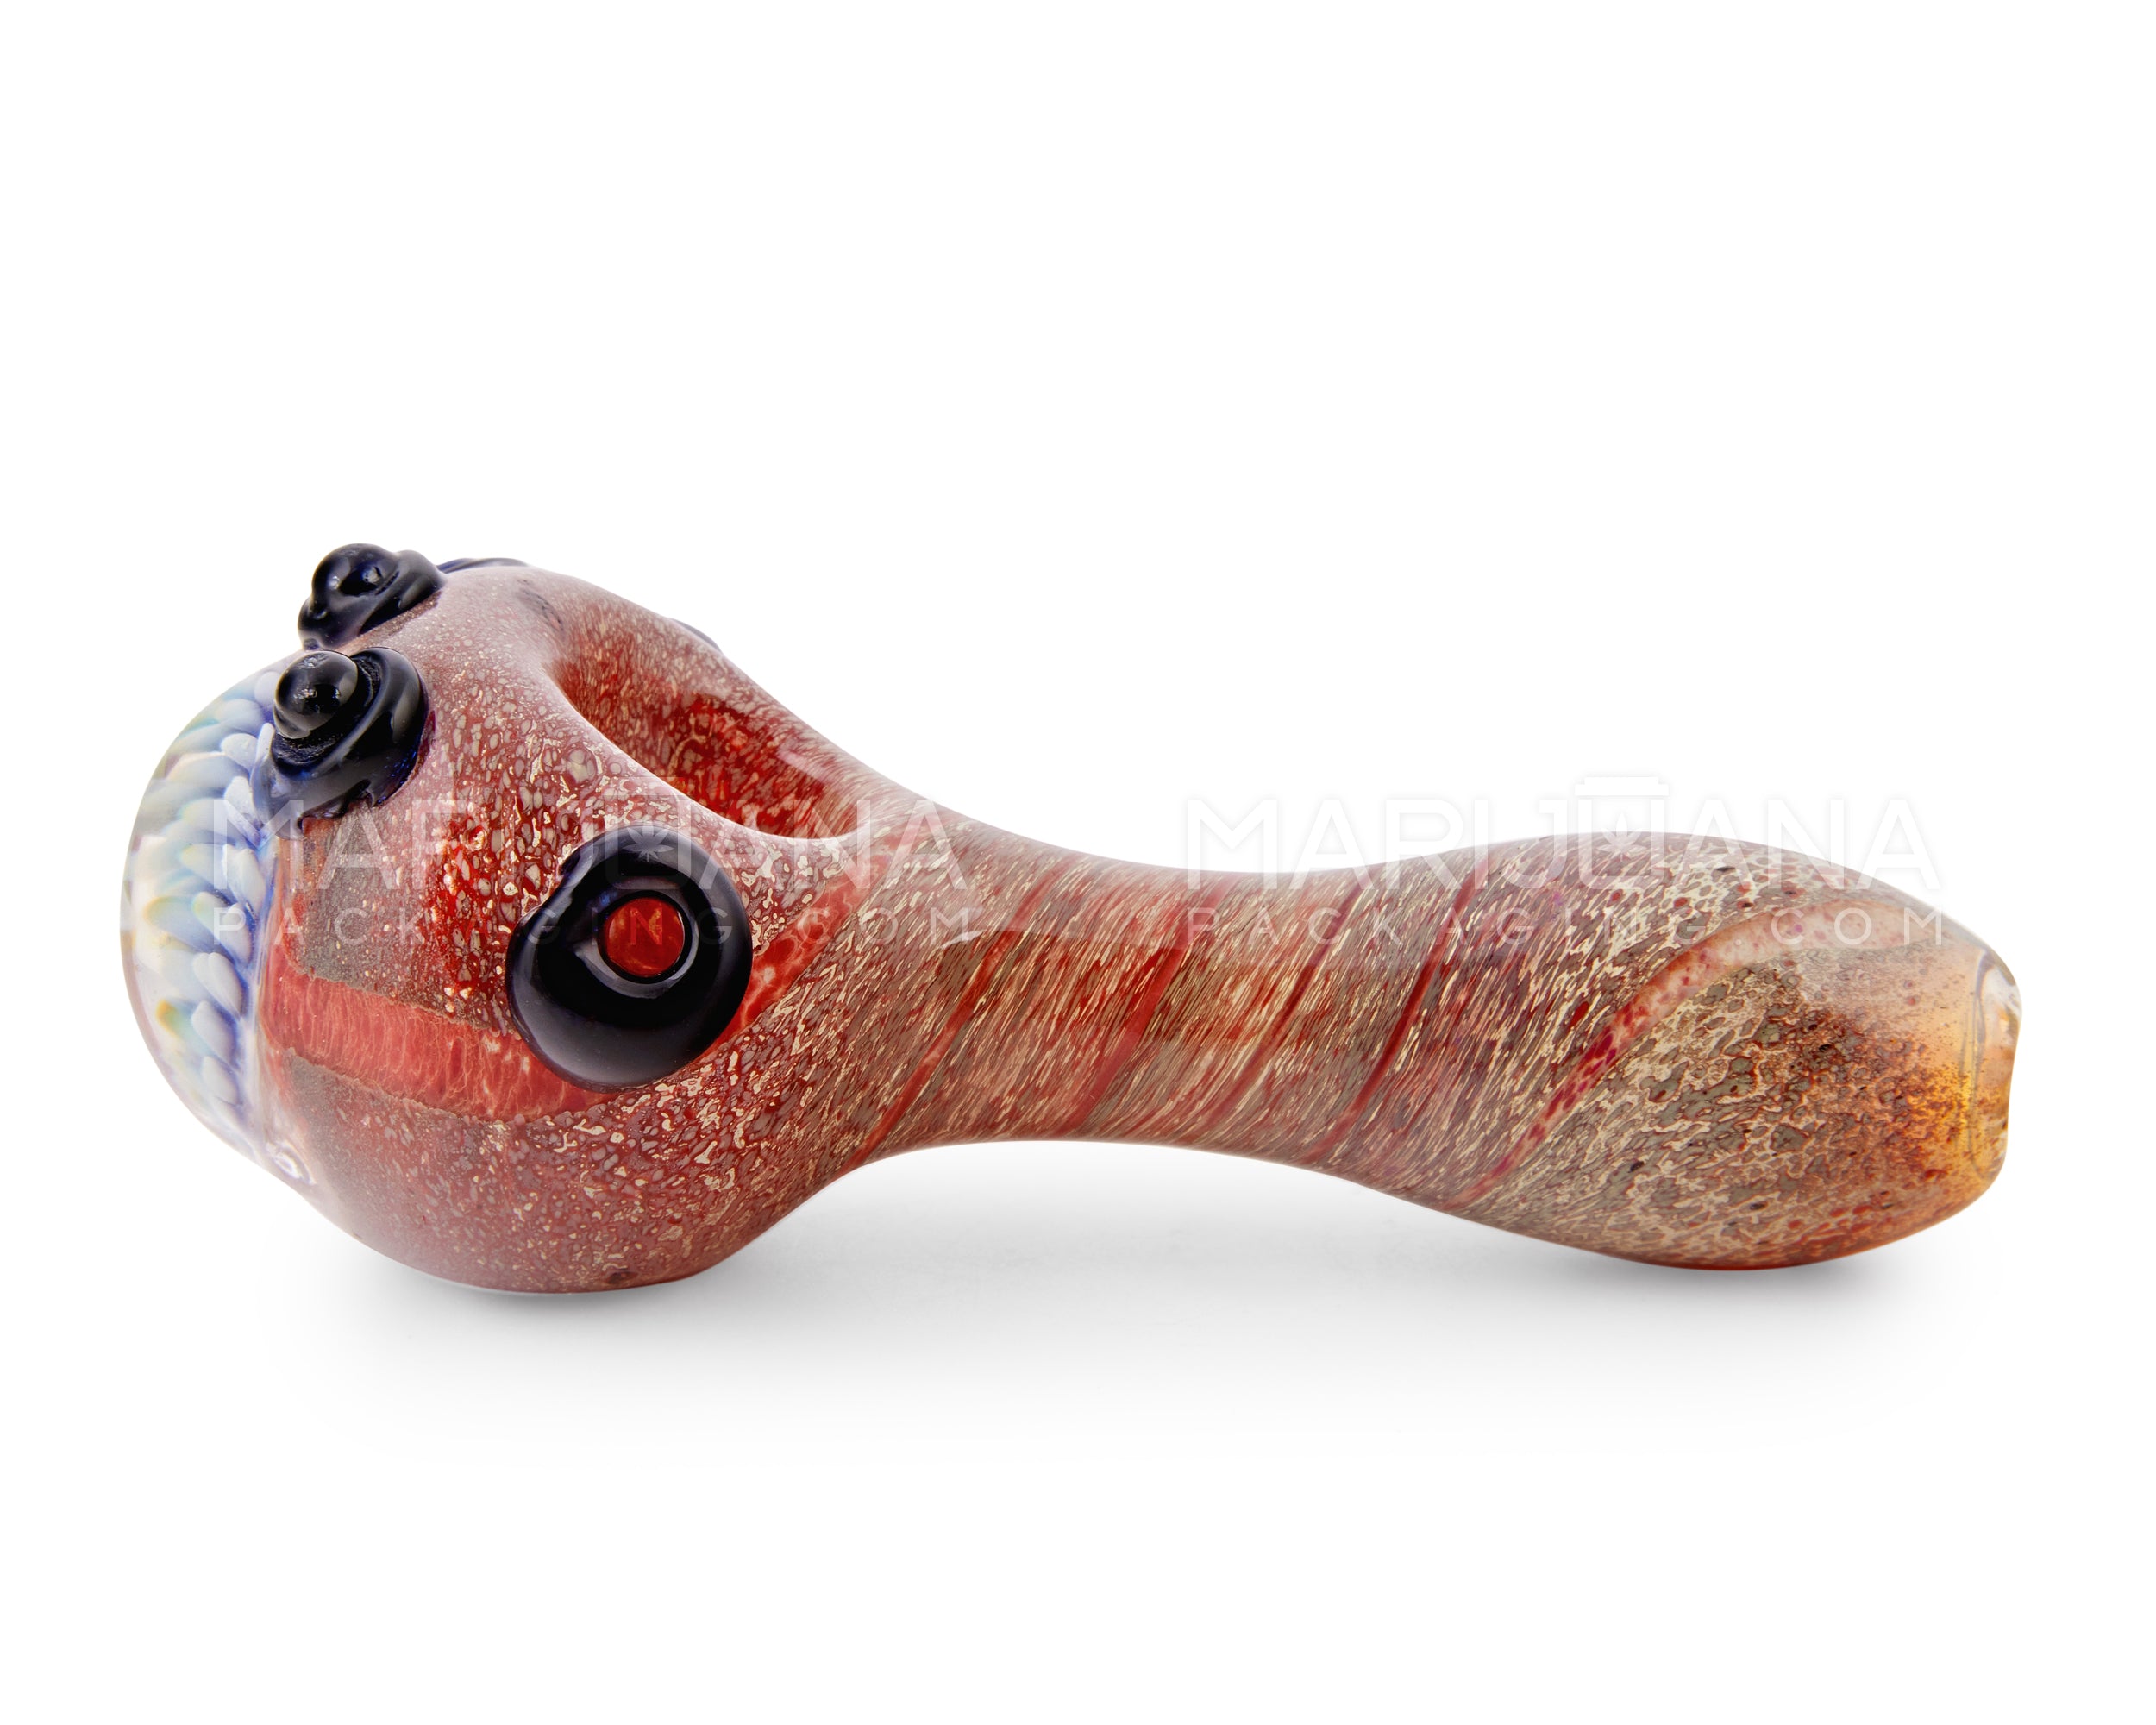 Frit & Fumed Spoon Hand Pipe w/ Flower Implosion | 4.5in Long - Glass - Assorted